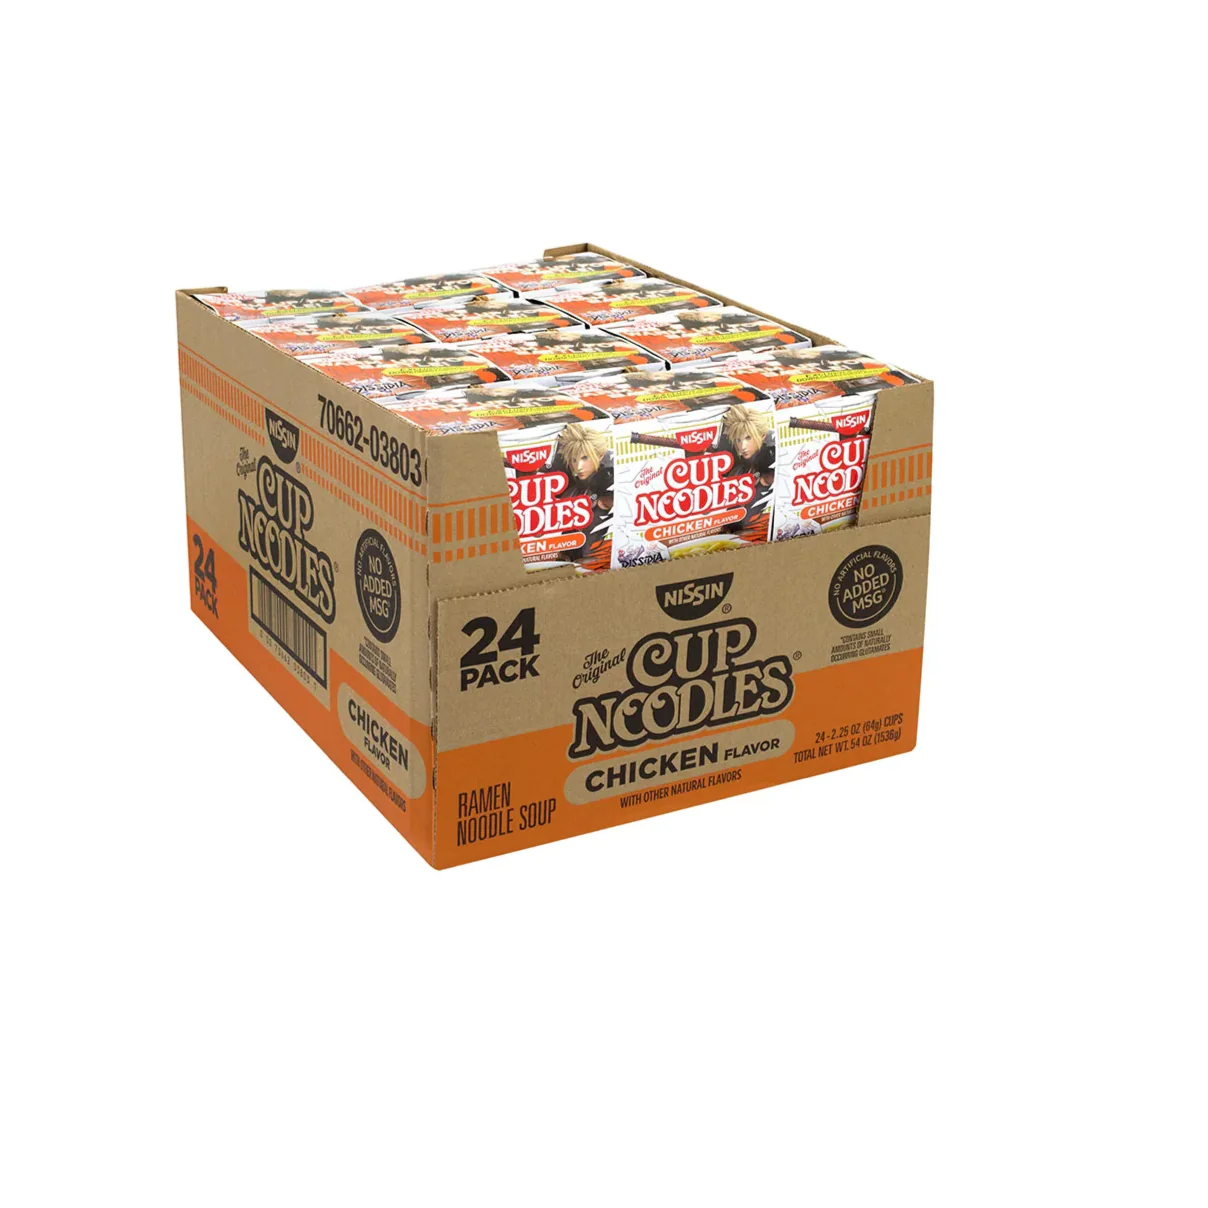 CUP NOODLE CHICKEN 24 PACK